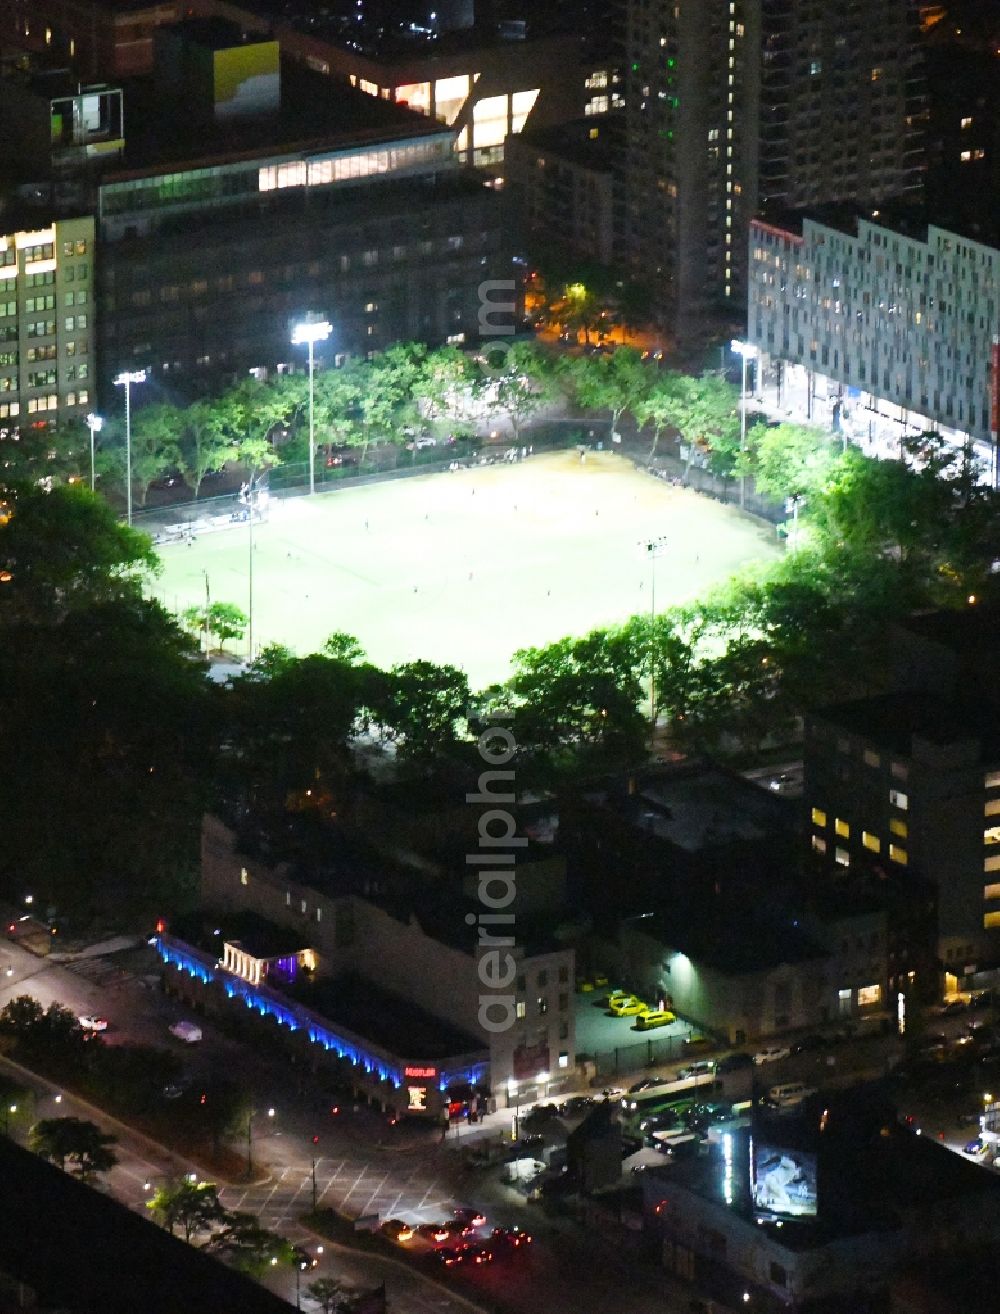 New York at night from above - Night lighting Ensemble of sports grounds De Witt Clinton Park in the district Manhattan in New York in United States of America. In the foreground the Larry Flynt's Hustler Club at the 51st